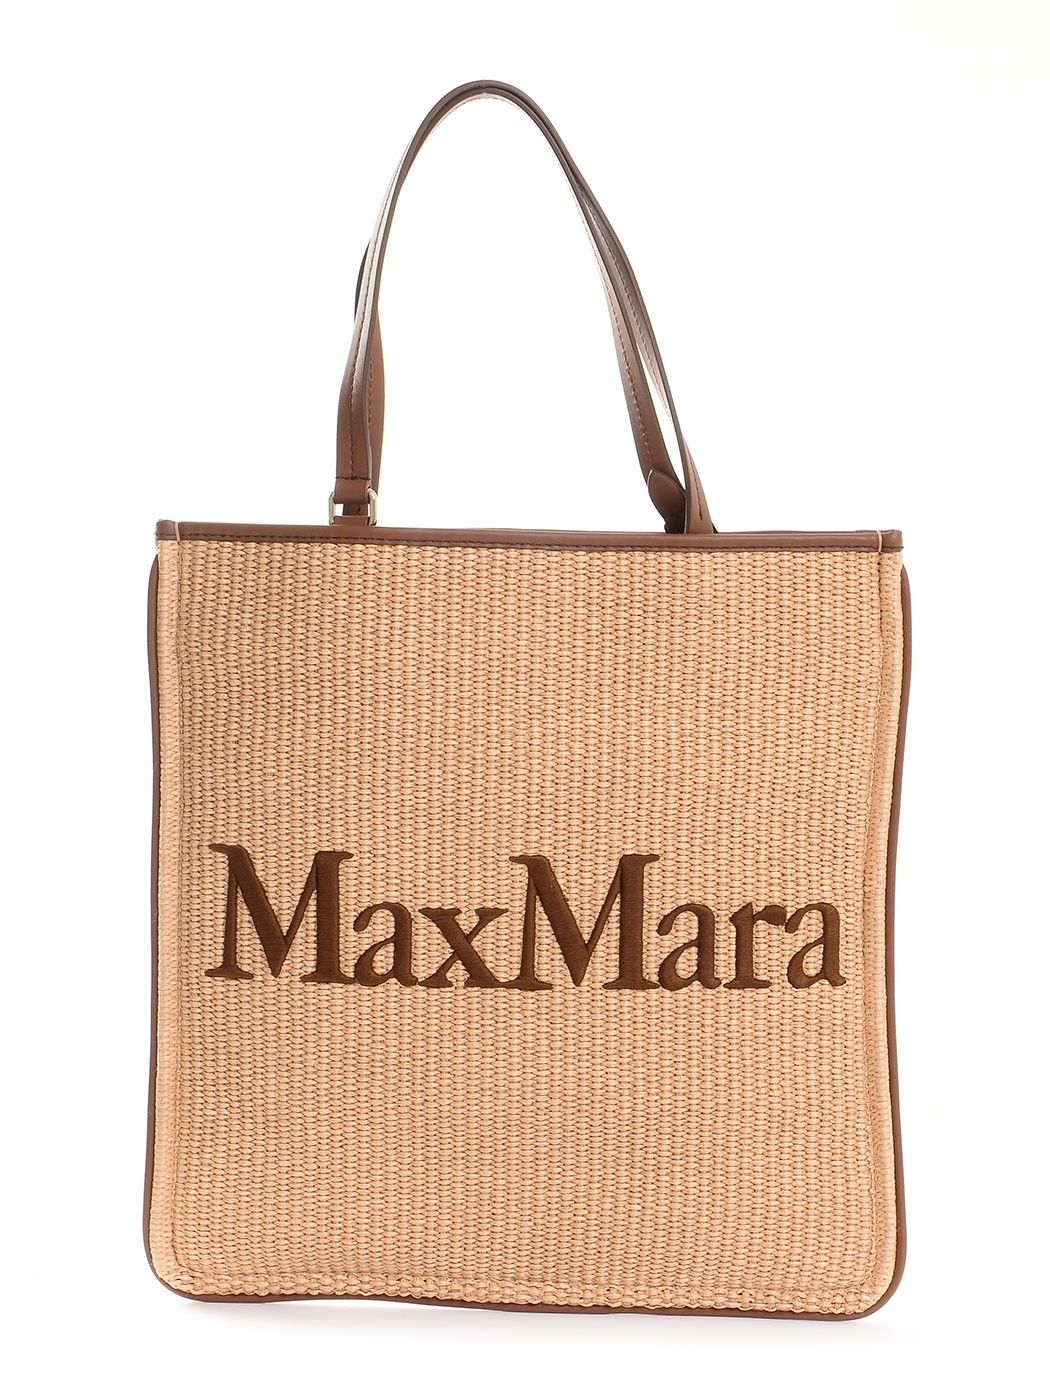  WOMAN BAGS,SPRING SUMMER COLLECTION,GIVENCHY BAGS,MARNI BAGS,LES PETITS JOUEURS BAGS  MAX MARA EASYBAG